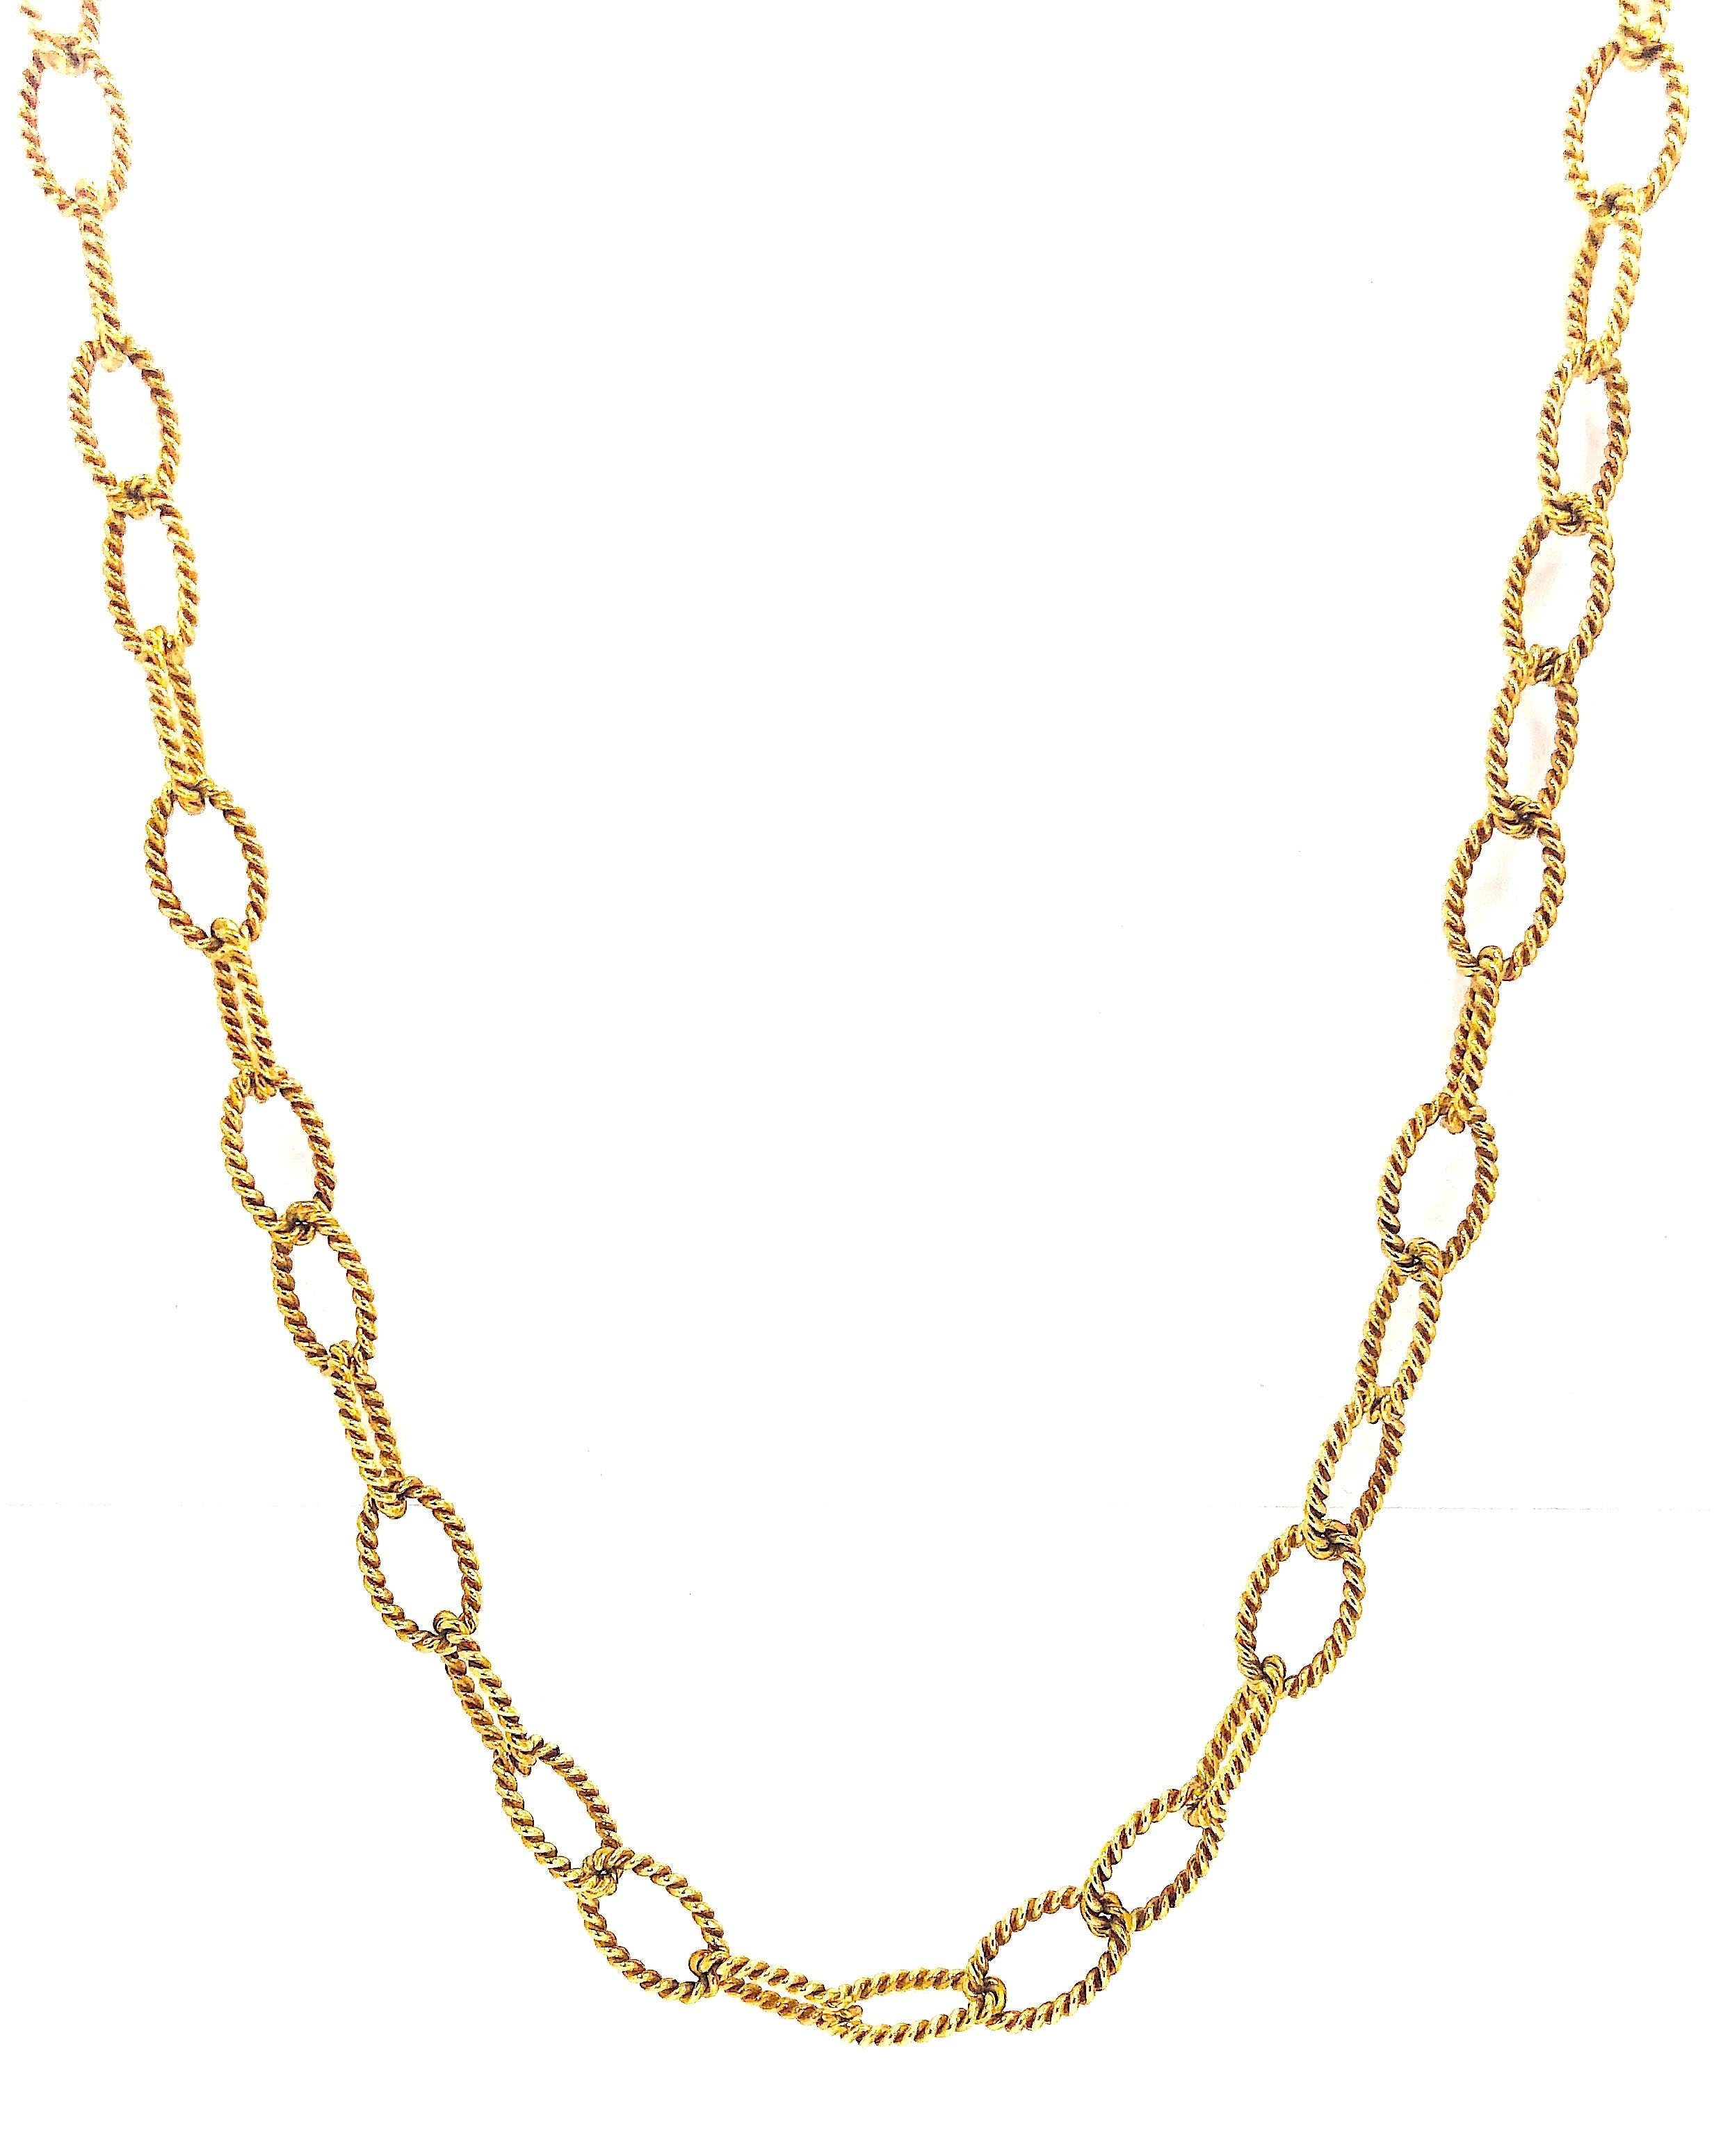 Amazing design on this Tiffany & Co is simply timeless! This incredible necklace and bracelet combination is crafted in 18k yellow gold. Ribbed design flows through this oval link pattern as the links are interconnected allowing the design to flow